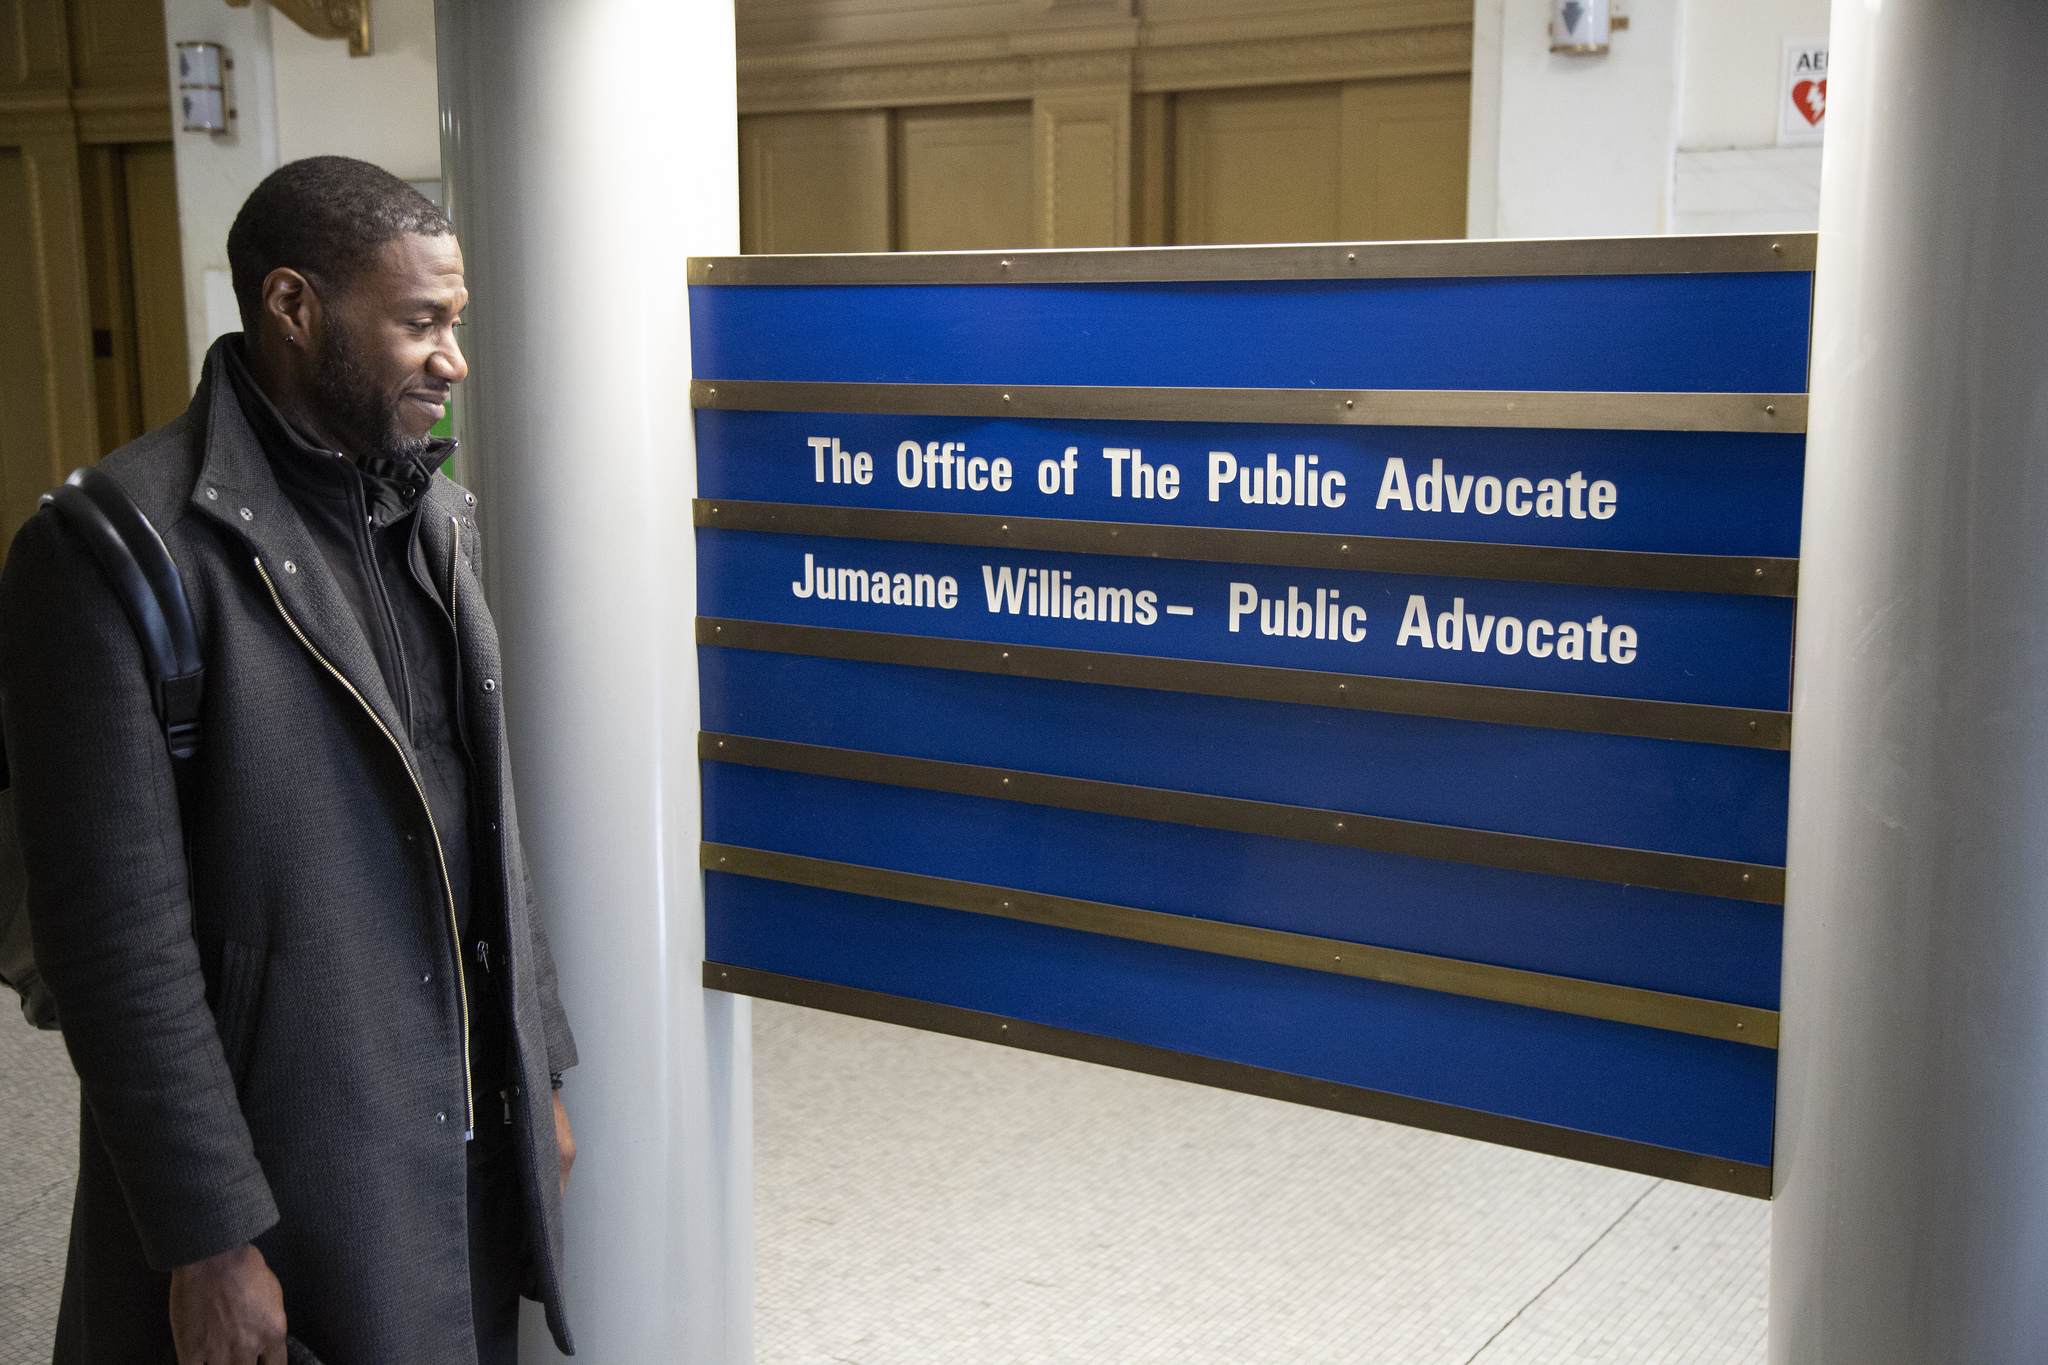 Public advocate-elect Jumaane Williams visits his new office for the first time.